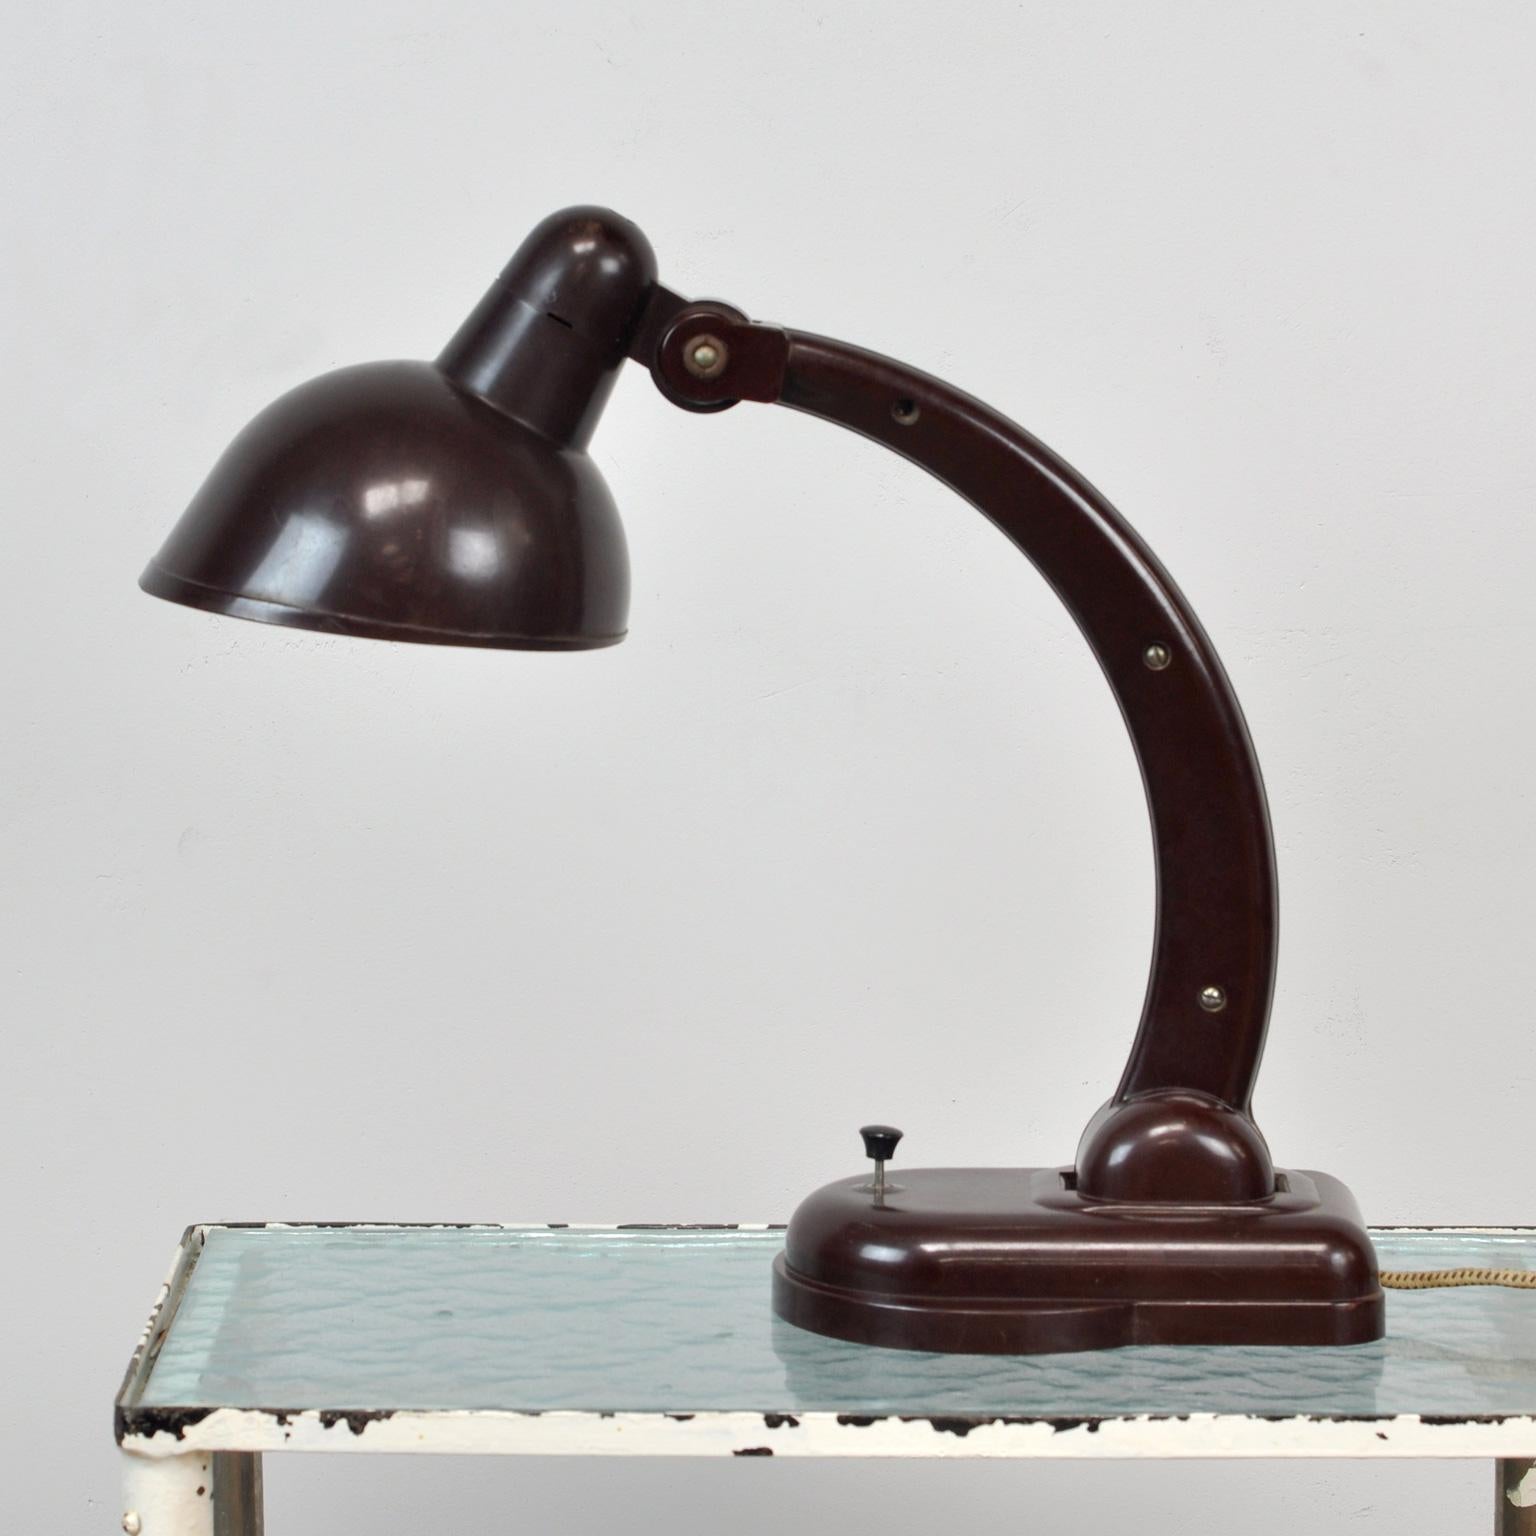 Desk lamp made from bakelite. Designed by Christian Dell in 1930. The lamp was manufactured by Heinrich Römmler AG, Preßstoffwerke, Spremberg circa 1932. It features an adjustable arm and cap. The table lamp was used in all administrative